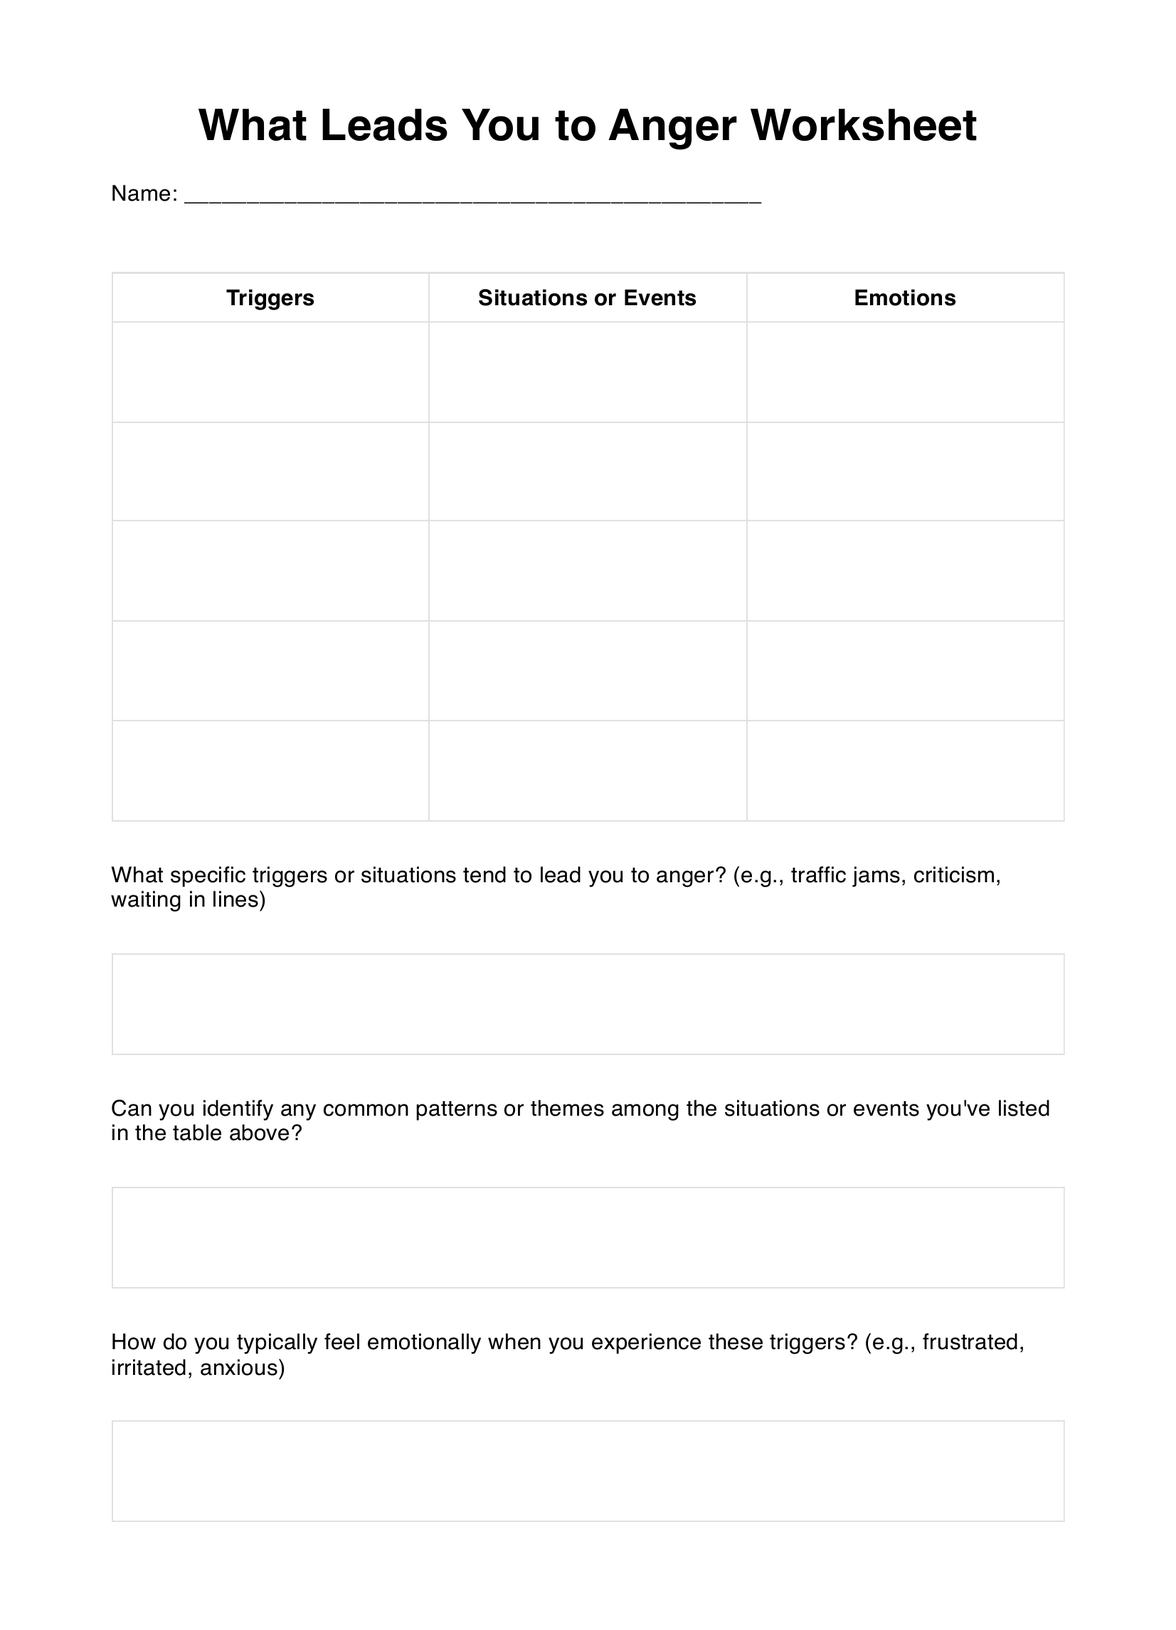 What Leads You to Anger Worksheet PDF Example